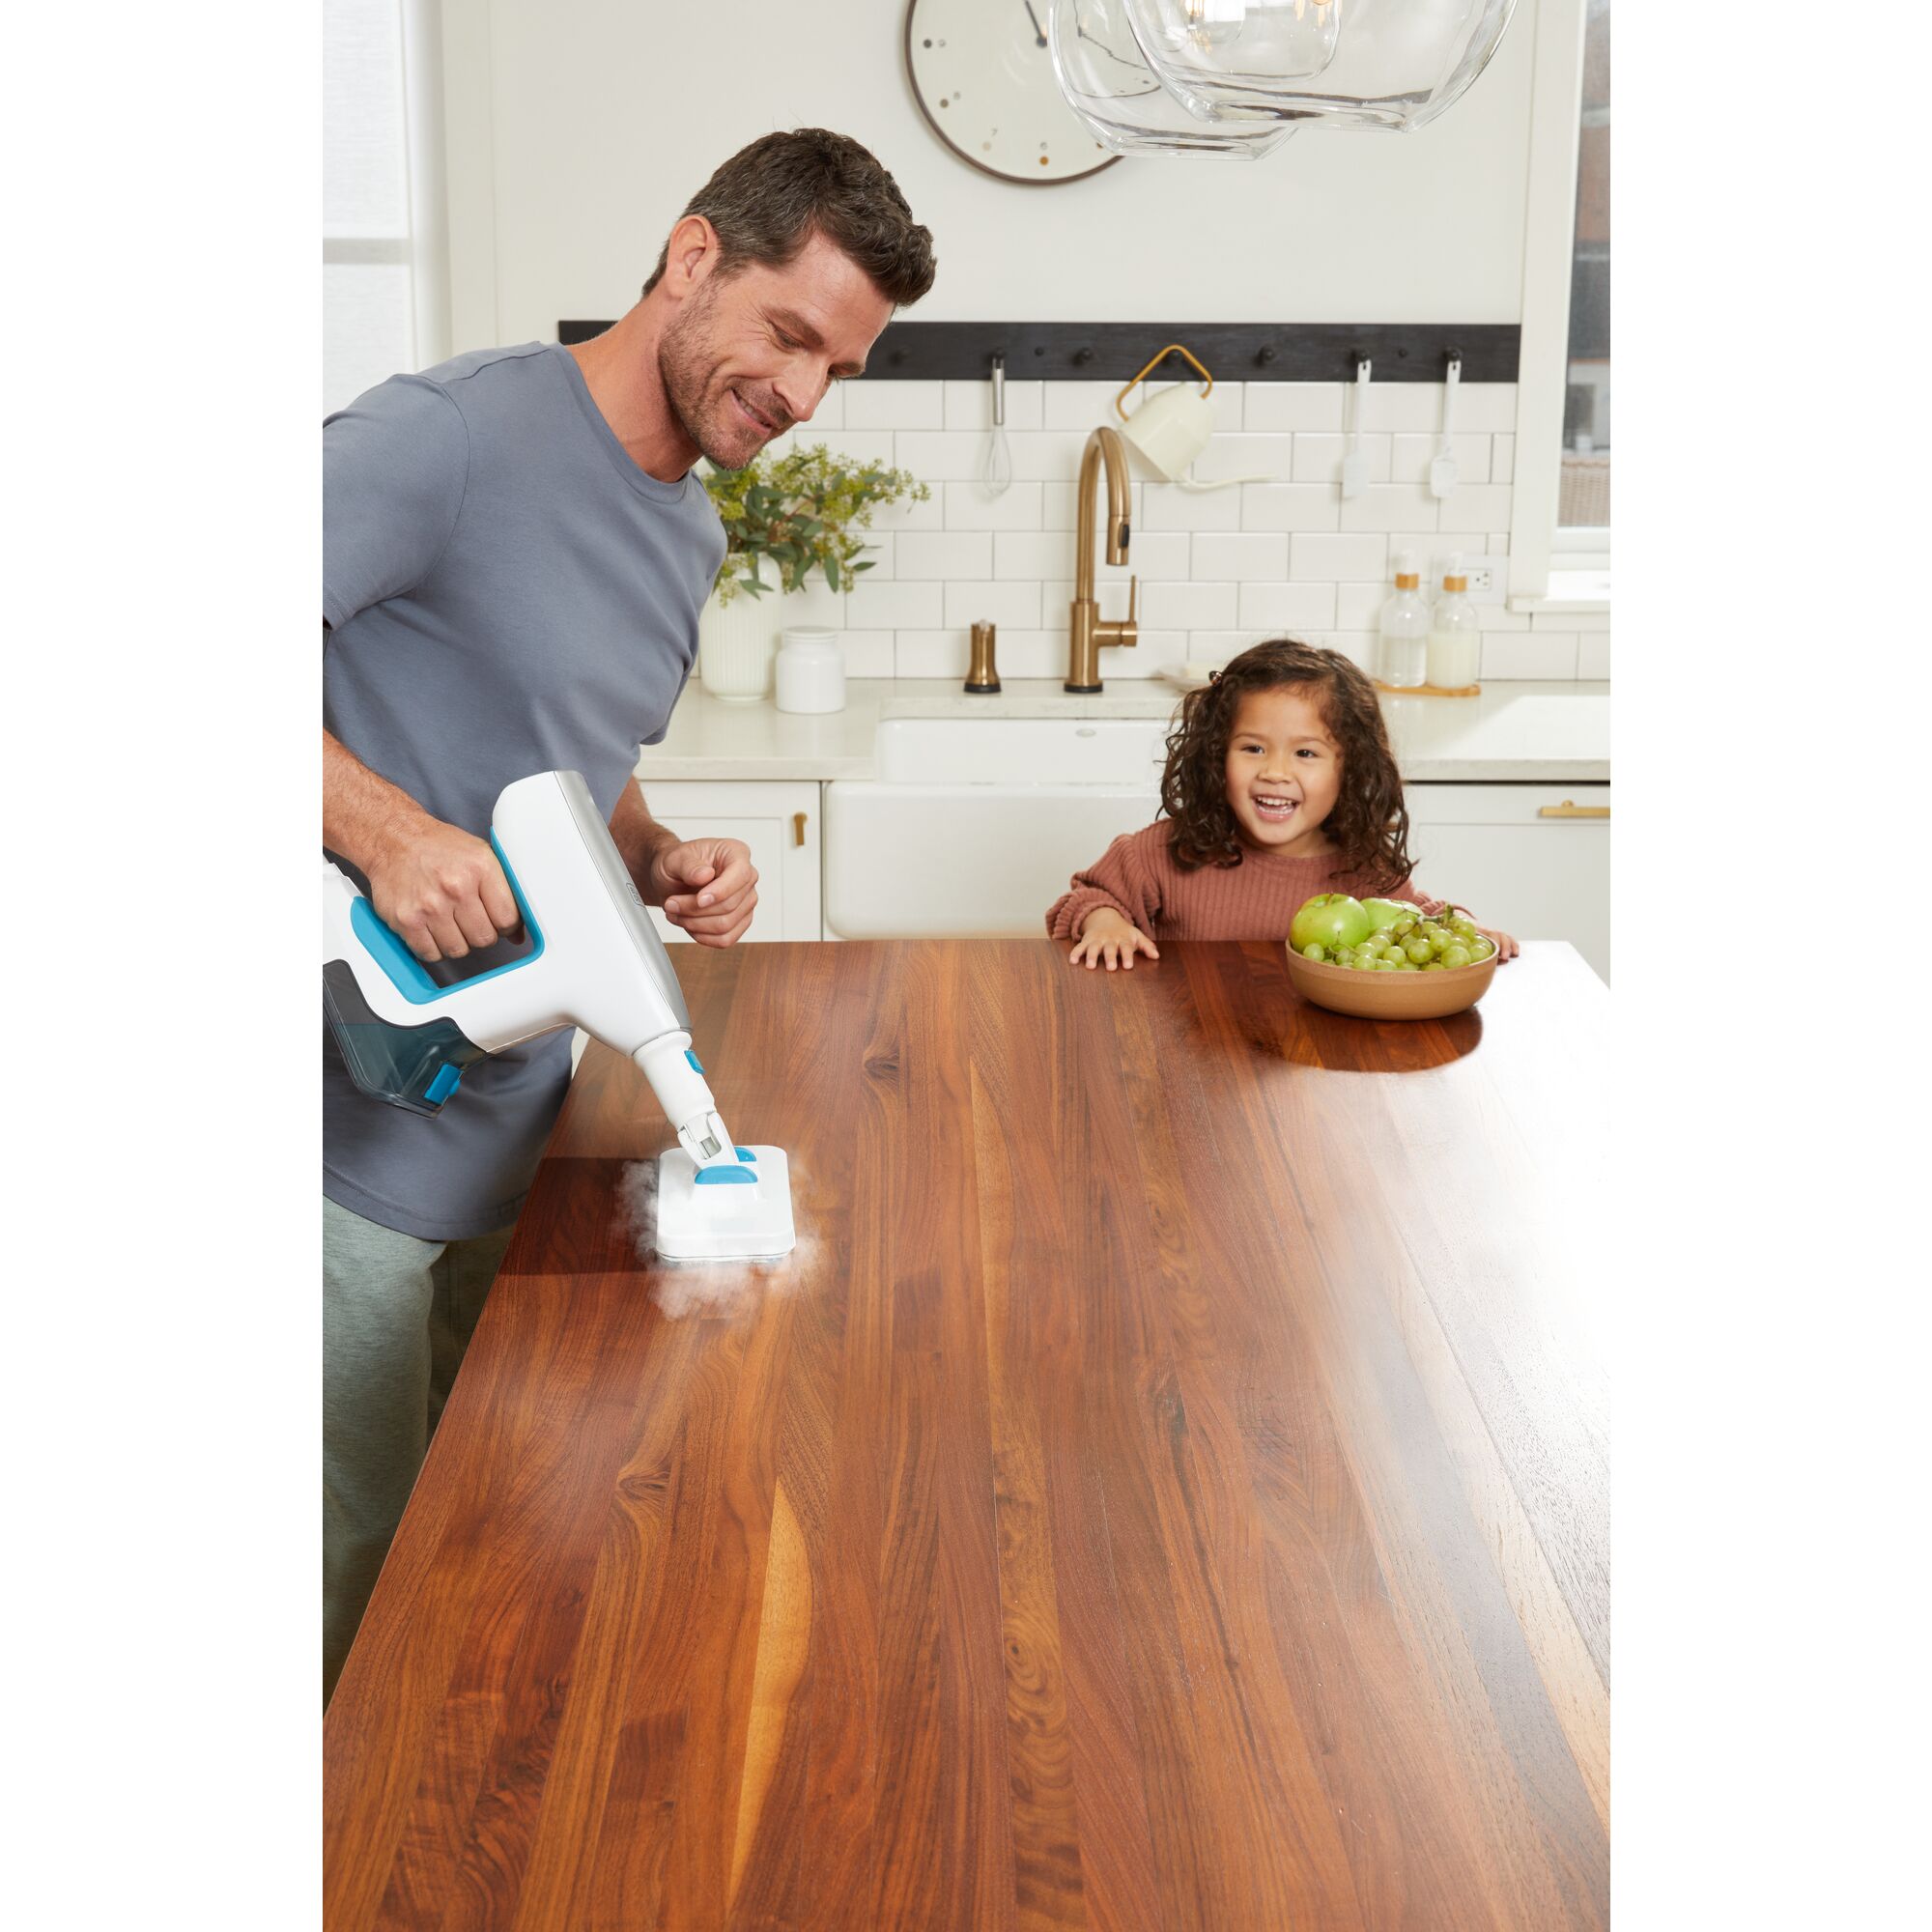 Man cleaning kitchen table with steam mop accessory while young child looks on